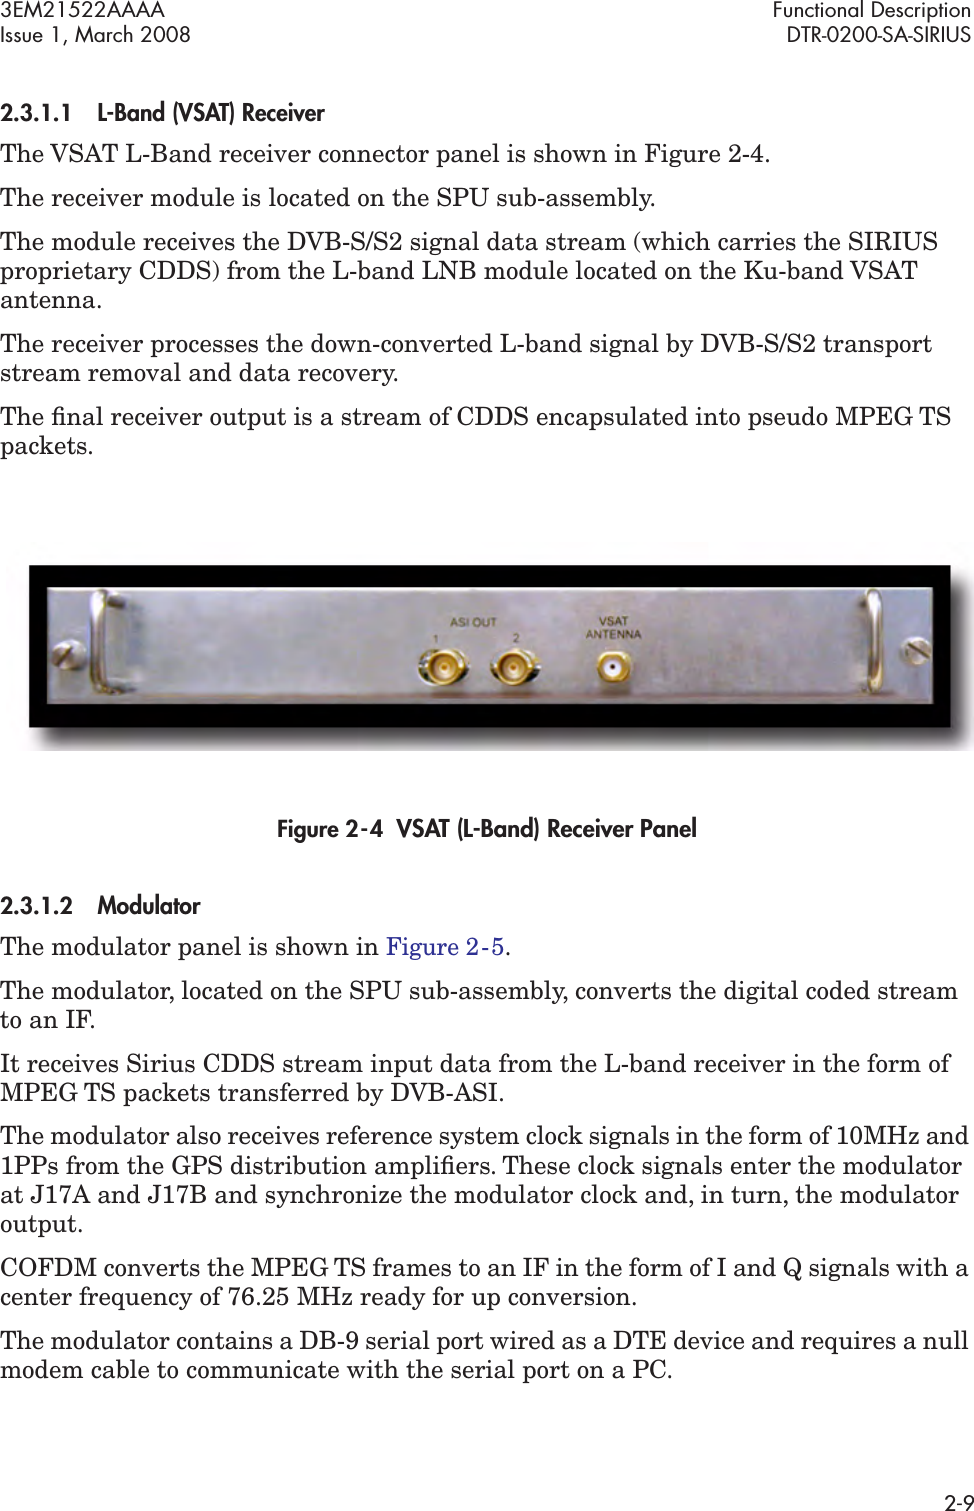 3EM21522AAAA Functional DescriptionIssue 1, March 2008 DTR-0200-SA-SIRIUS2-92.3.1.1L-Band (VSAT) ReceiverThe VSAT L-Band receiver connector panel is shown in Figure 2-4.The receiver module is located on the SPU sub-assembly.The module receives the DVB-S/S2 signal data stream (which carries the SIRIUS proprietary CDDS) from the L-band LNB module located on the Ku-band VSAT antenna.The receiver processes the down-converted L-band signal by DVB-S/S2 transport stream removal and data recovery.The ﬁnal receiver output is a stream of CDDS encapsulated into pseudo MPEG TS packets.Figure 2  -  4  VSAT (L-Band) Receiver Panel2.3.1.2Modulator The modulator panel is shown in Figure 2  -  5. The modulator, located on the SPU sub-assembly, converts the digital coded stream to an IF.It receives Sirius CDDS stream input data from the L-band receiver in the form of MPEG TS packets transferred by DVB-ASI.The modulator also receives reference system clock signals in the form of 10MHz and 1PPs from the GPS distribution ampliﬁers. These clock signals enter the modulator at J17A and J17B and synchronize the modulator clock and, in turn, the modulator output.COFDM converts the MPEG TS frames to an IF in the form of I and Q signals with a center frequency of 76.25 MHz ready for up conversion.The modulator contains a DB-9 serial port wired as a DTE device and requires a null modem cable to communicate with the serial port on a PC.